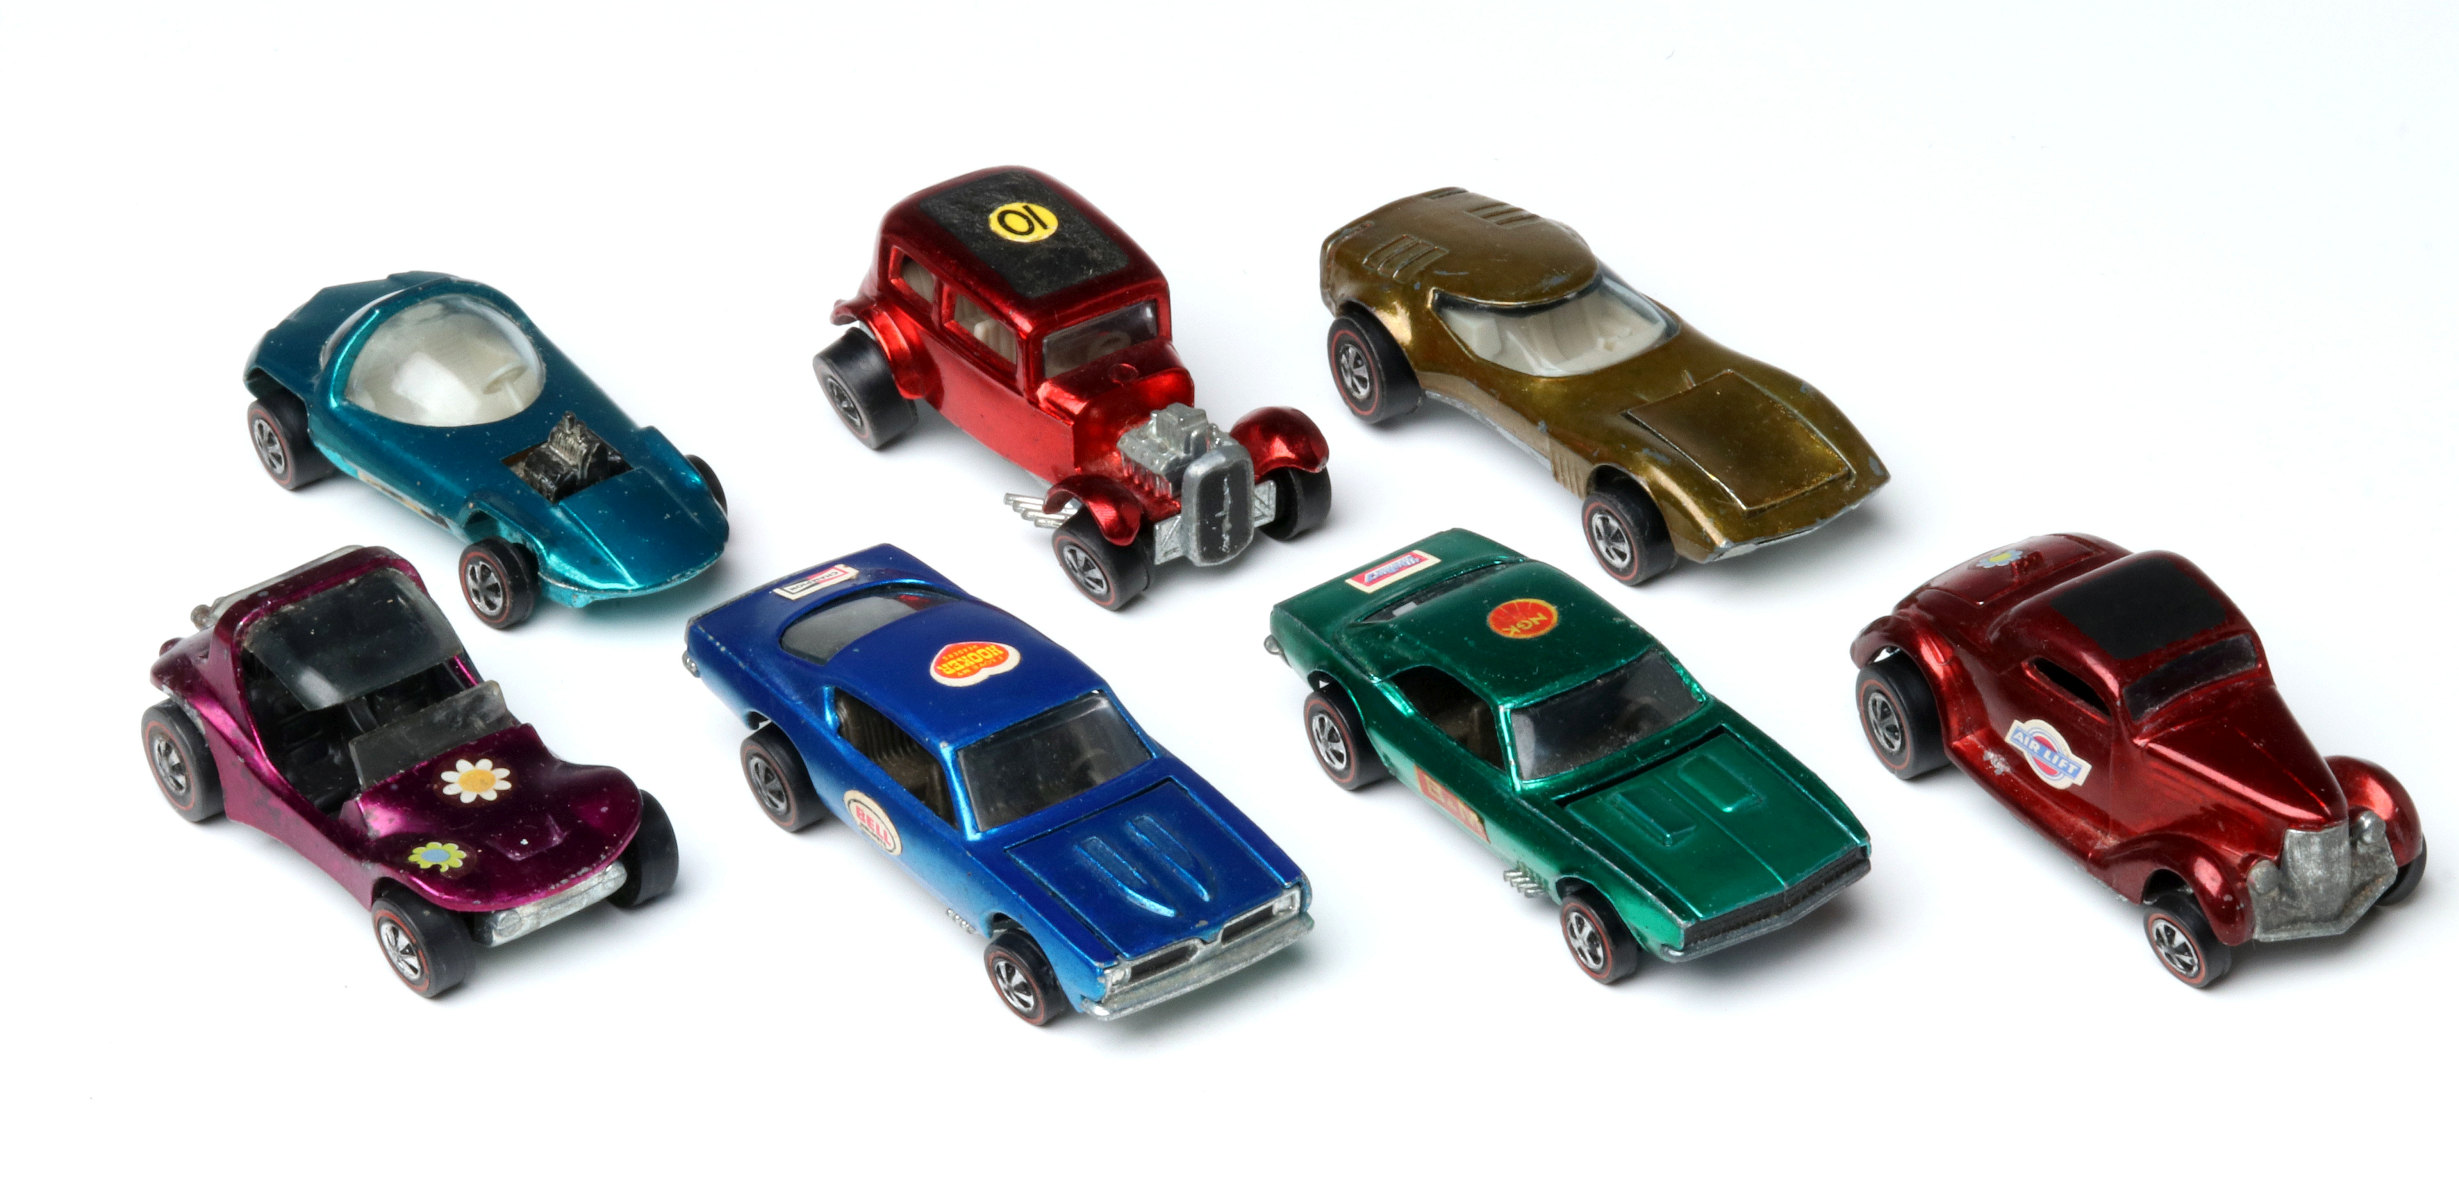 A COLLECTION OF SEVEN ORIGINAL VINTAGE HOT WHEELS CARS